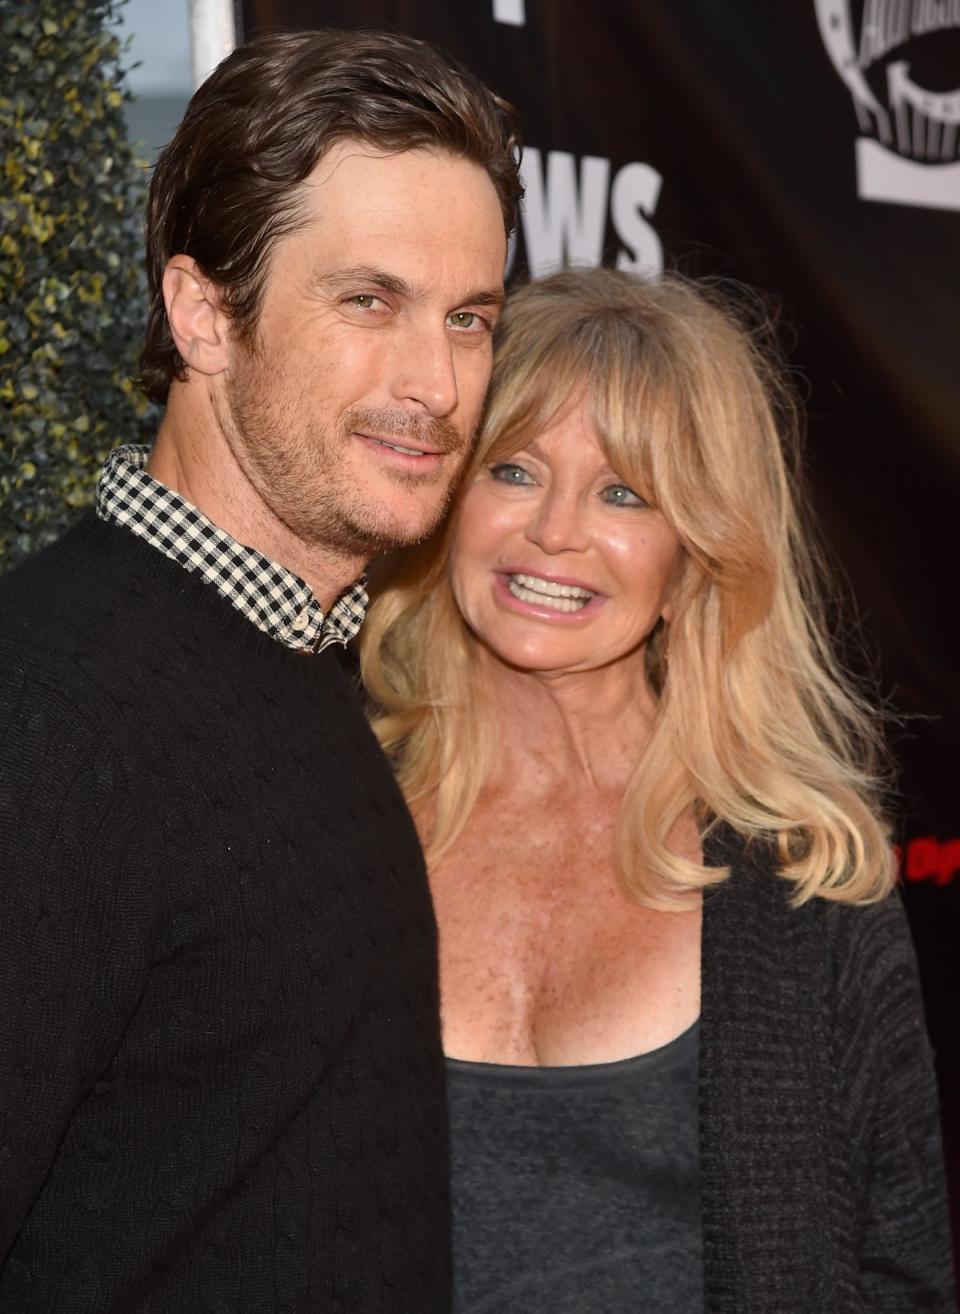 Goldie Hawn has teased something could potentially be in the pipeline with son Oliver Hudson (Getty Images)